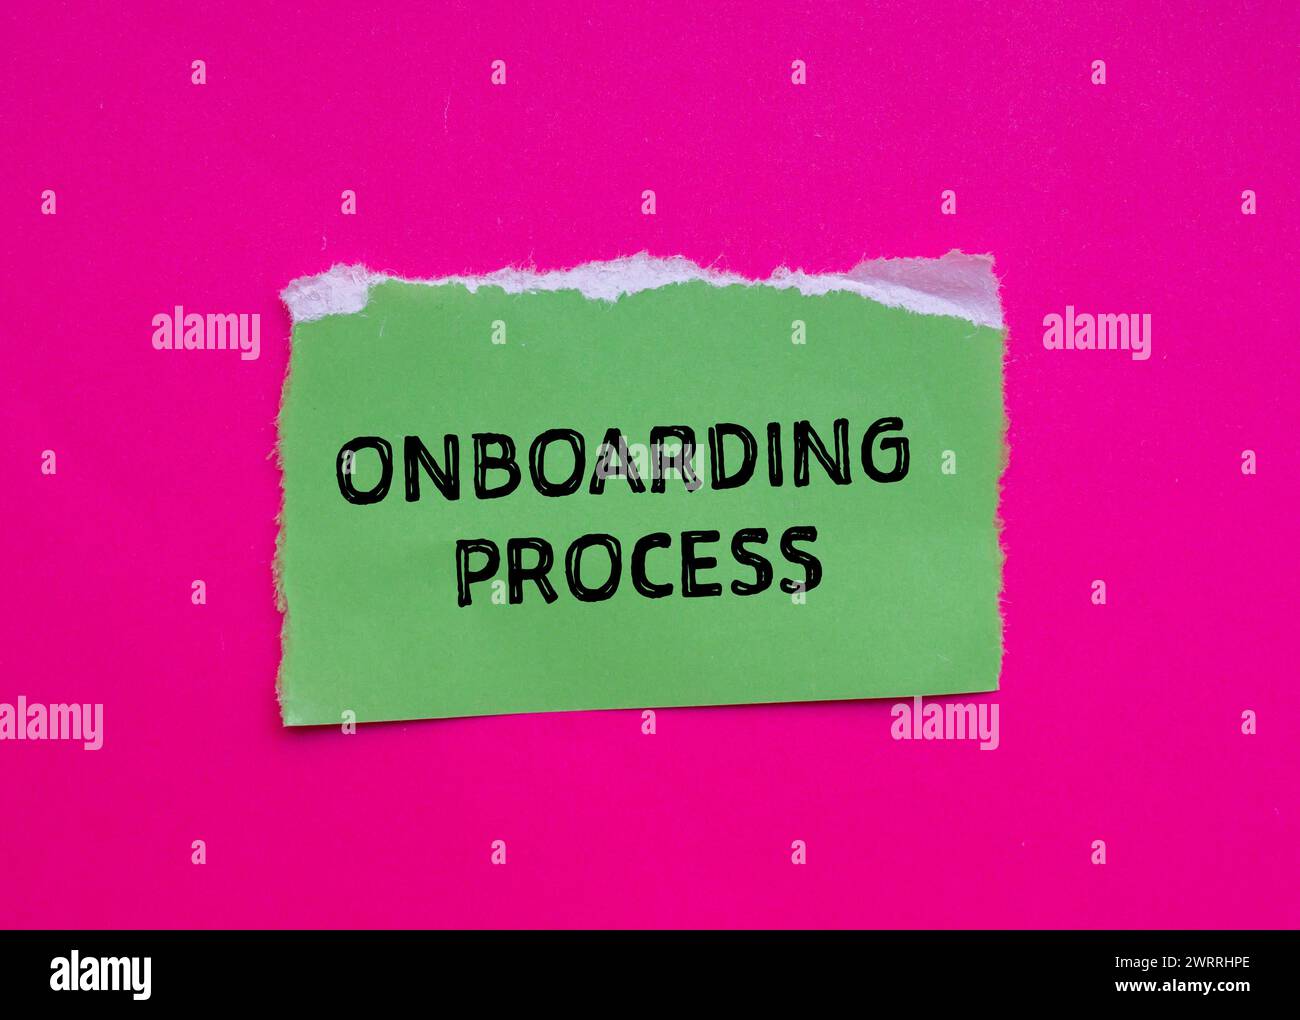 Onboarding process words written on green torn paper with pink background. Conceptual business symbol. Copy space. Stock Photo